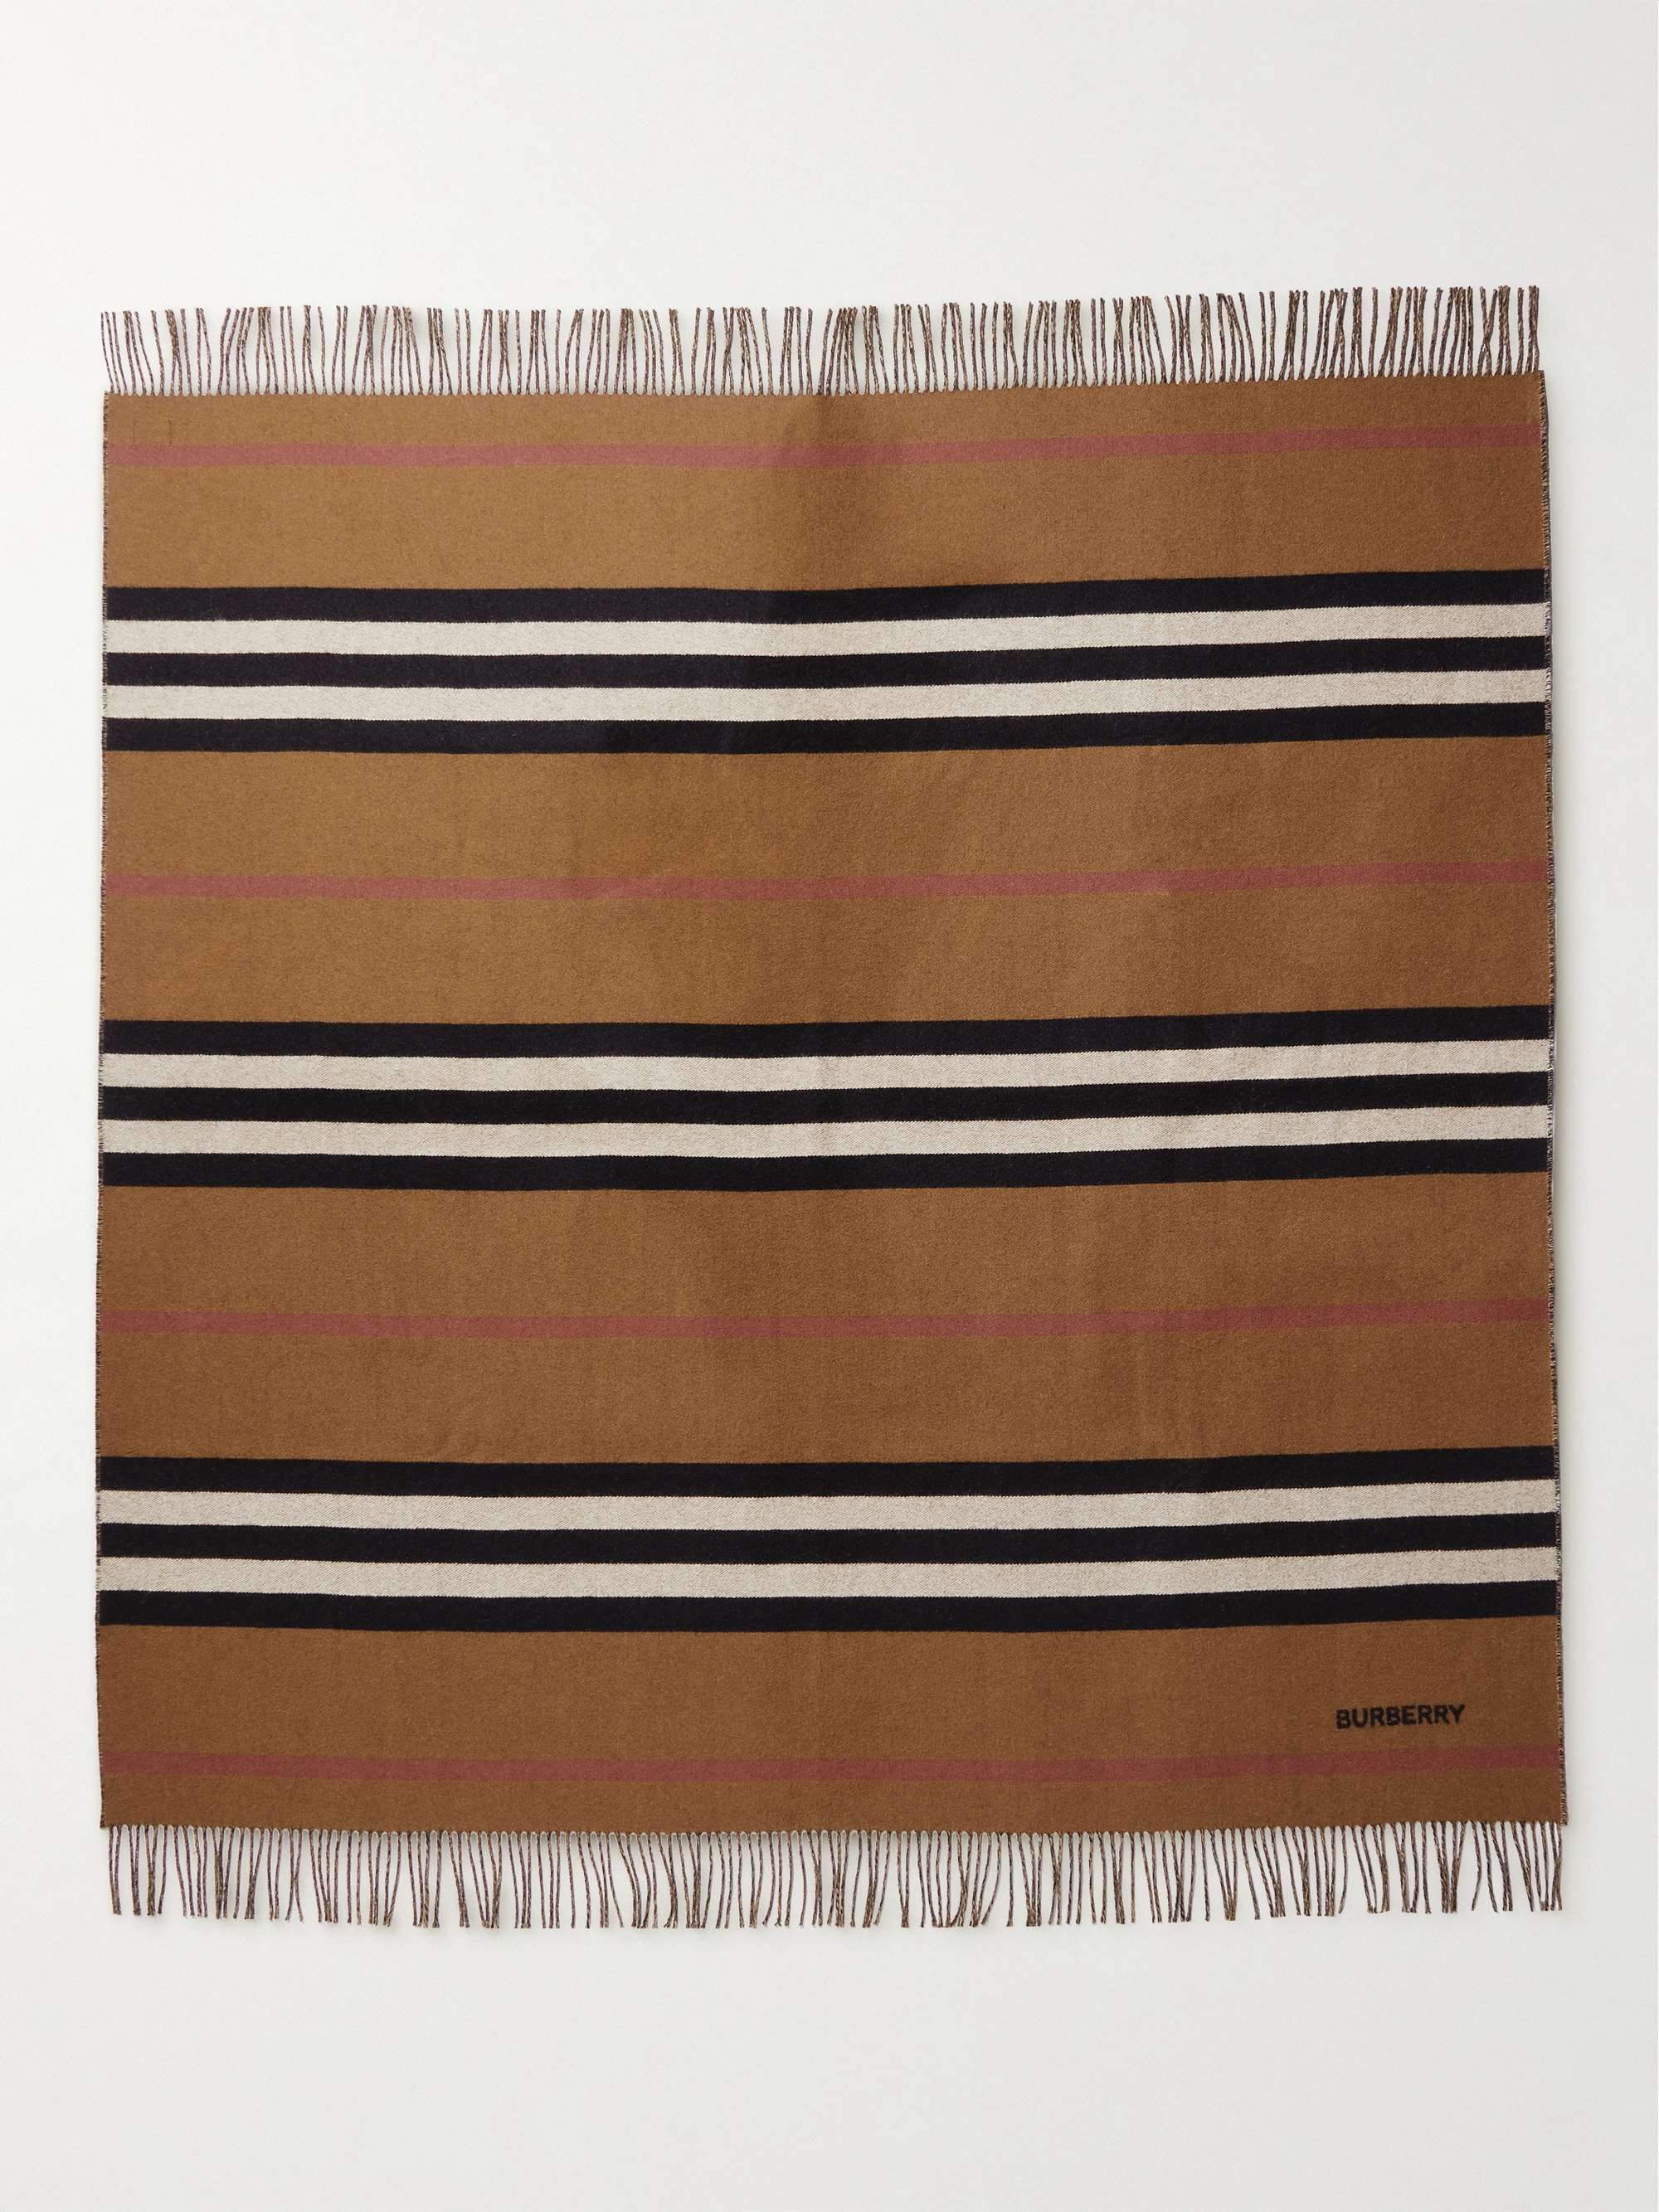 BURBERRY Fringed Striped Cashmere and Wool-Blend Blanket